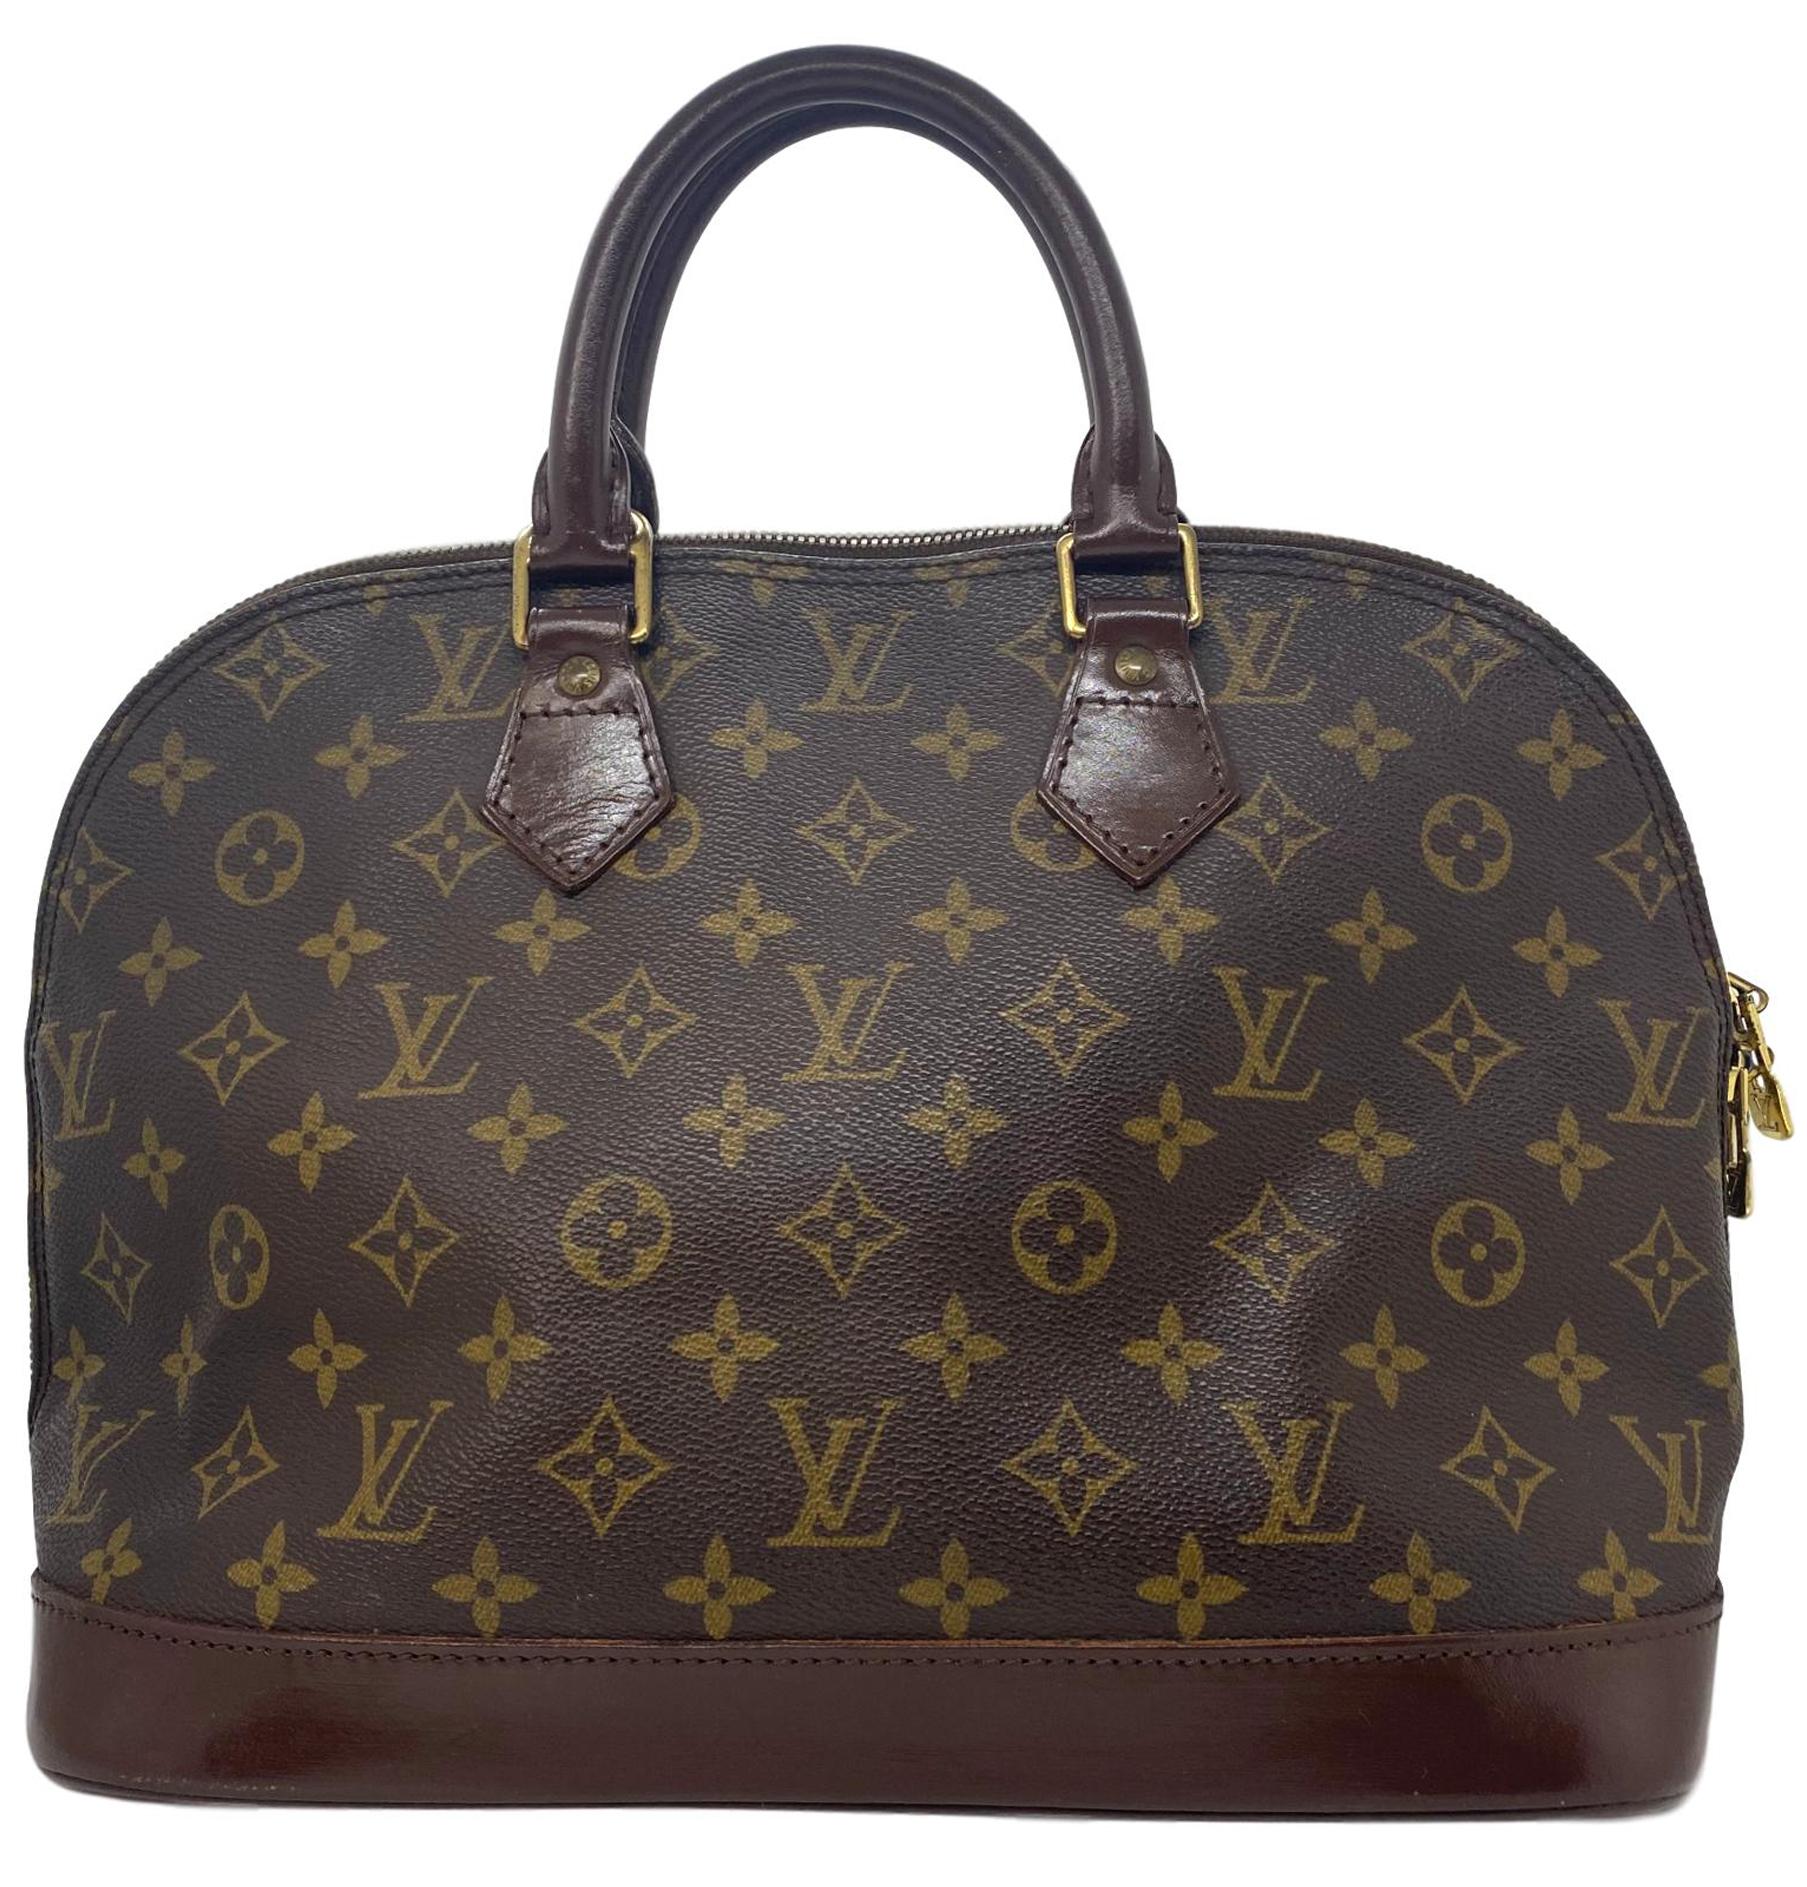 Handbag Facelift  How I Cleaned & Conditioned the Vachetta on My Vintage  Louis Vuitton Speedy 30 